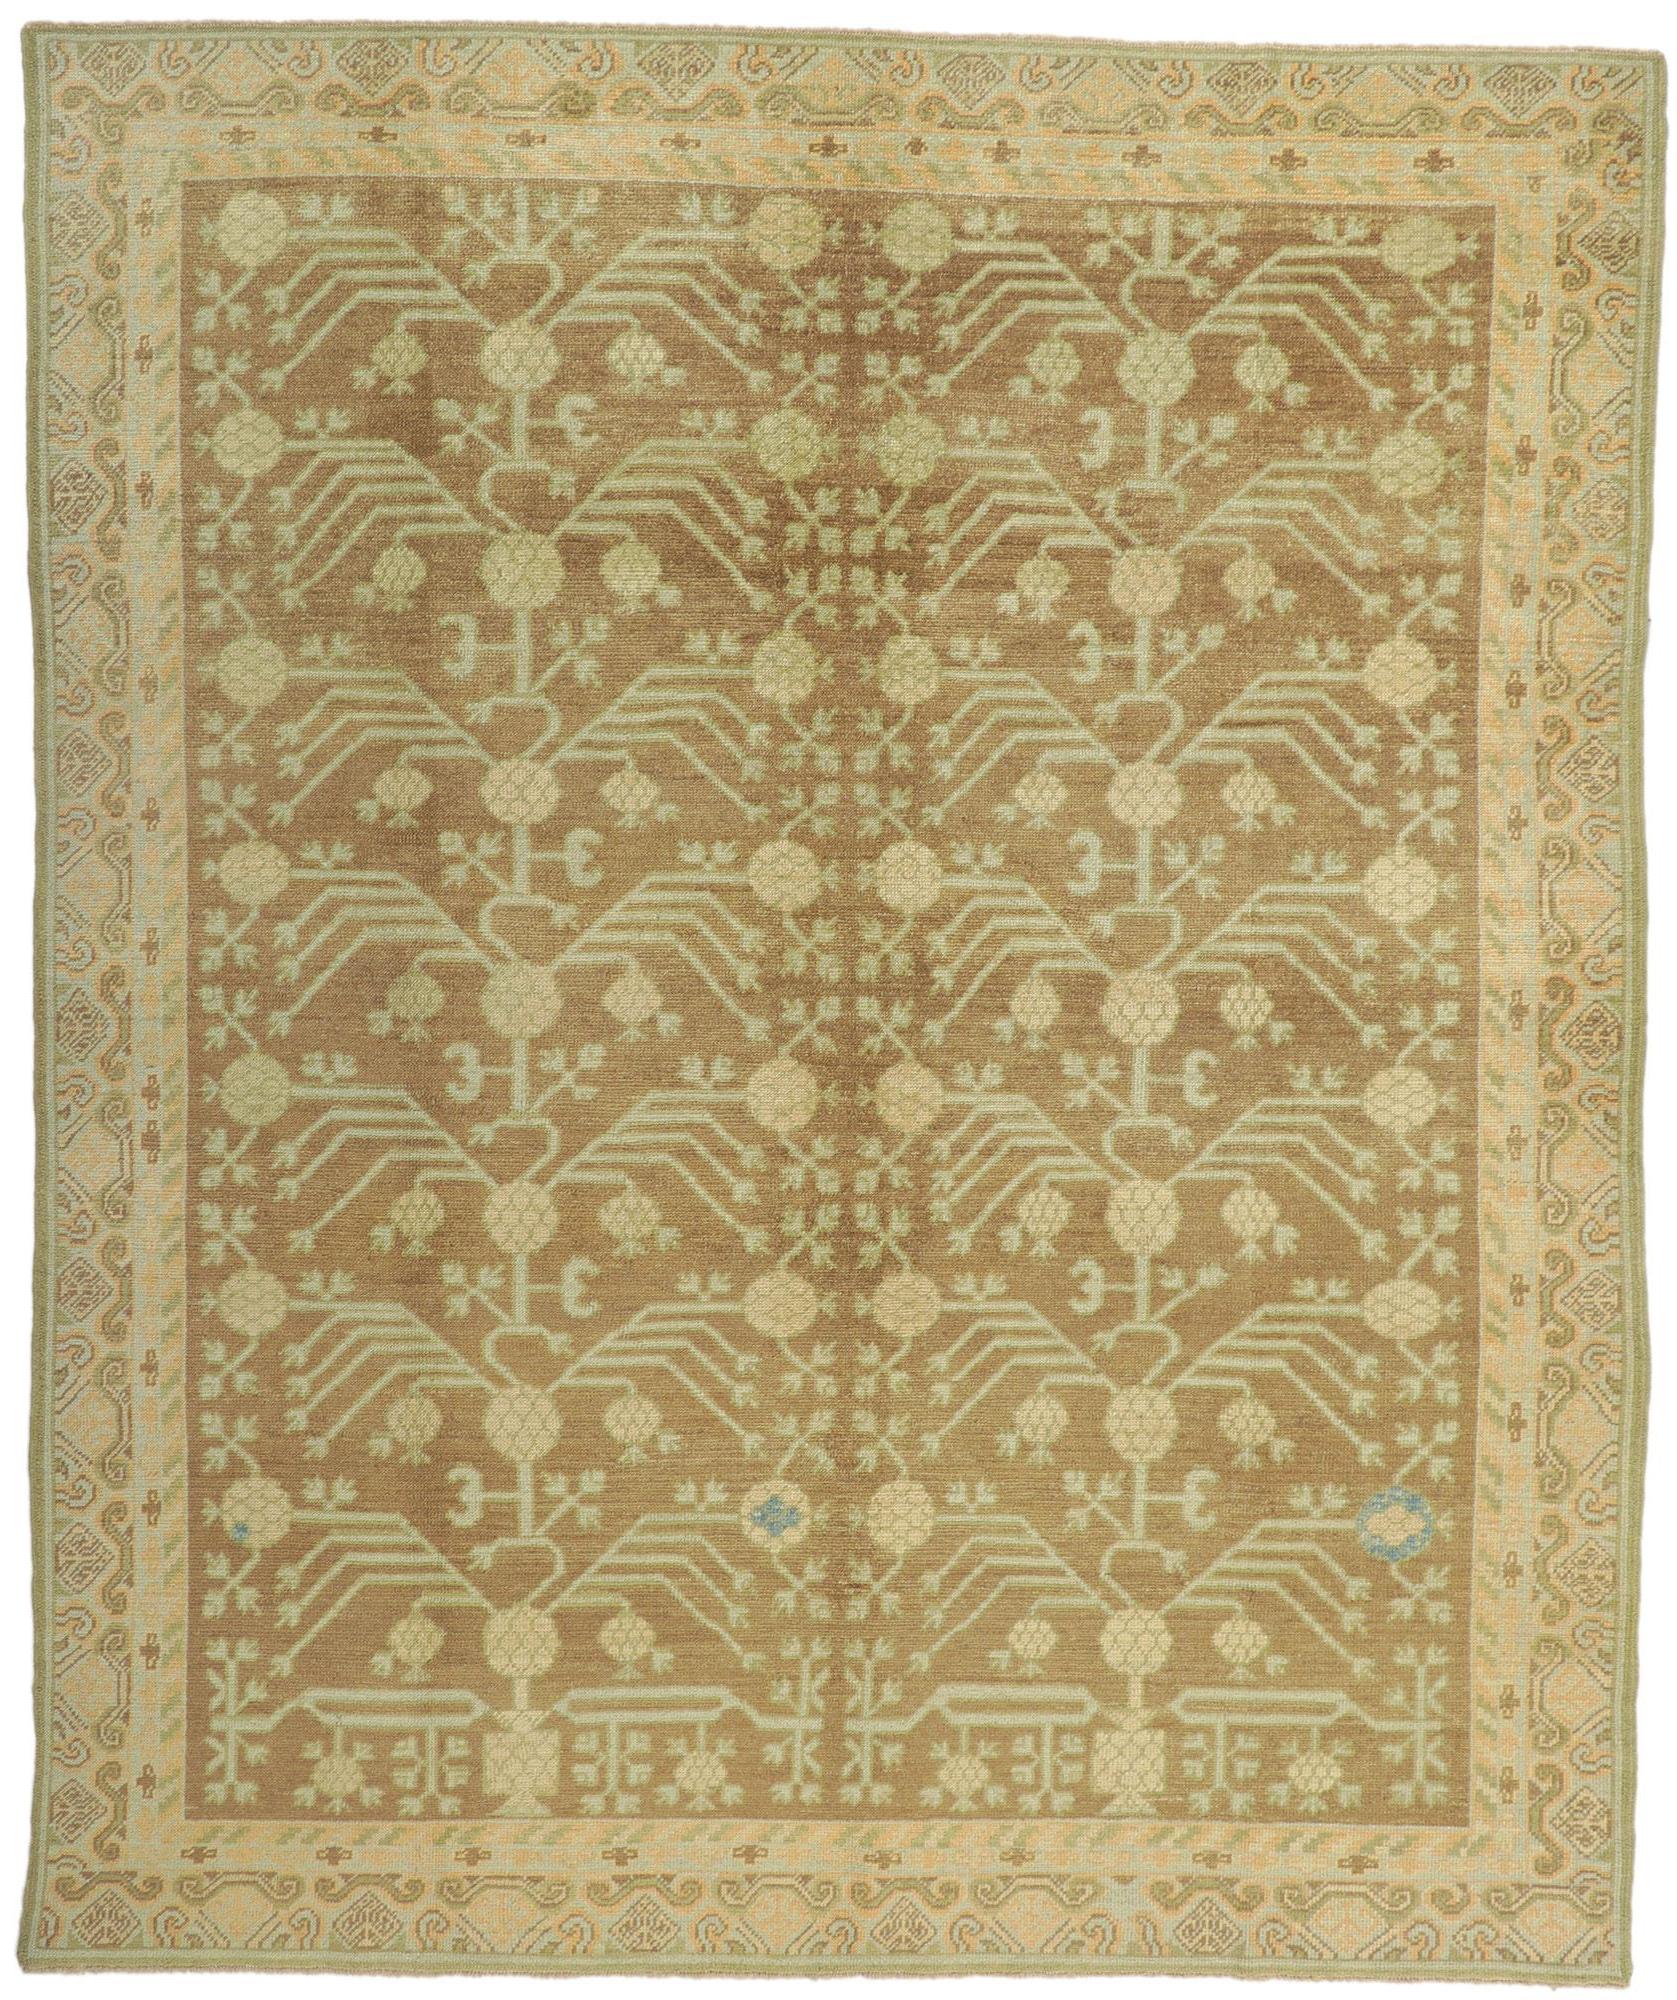 New Turkish Khotan Rug with Earth-Tone Colors For Sale